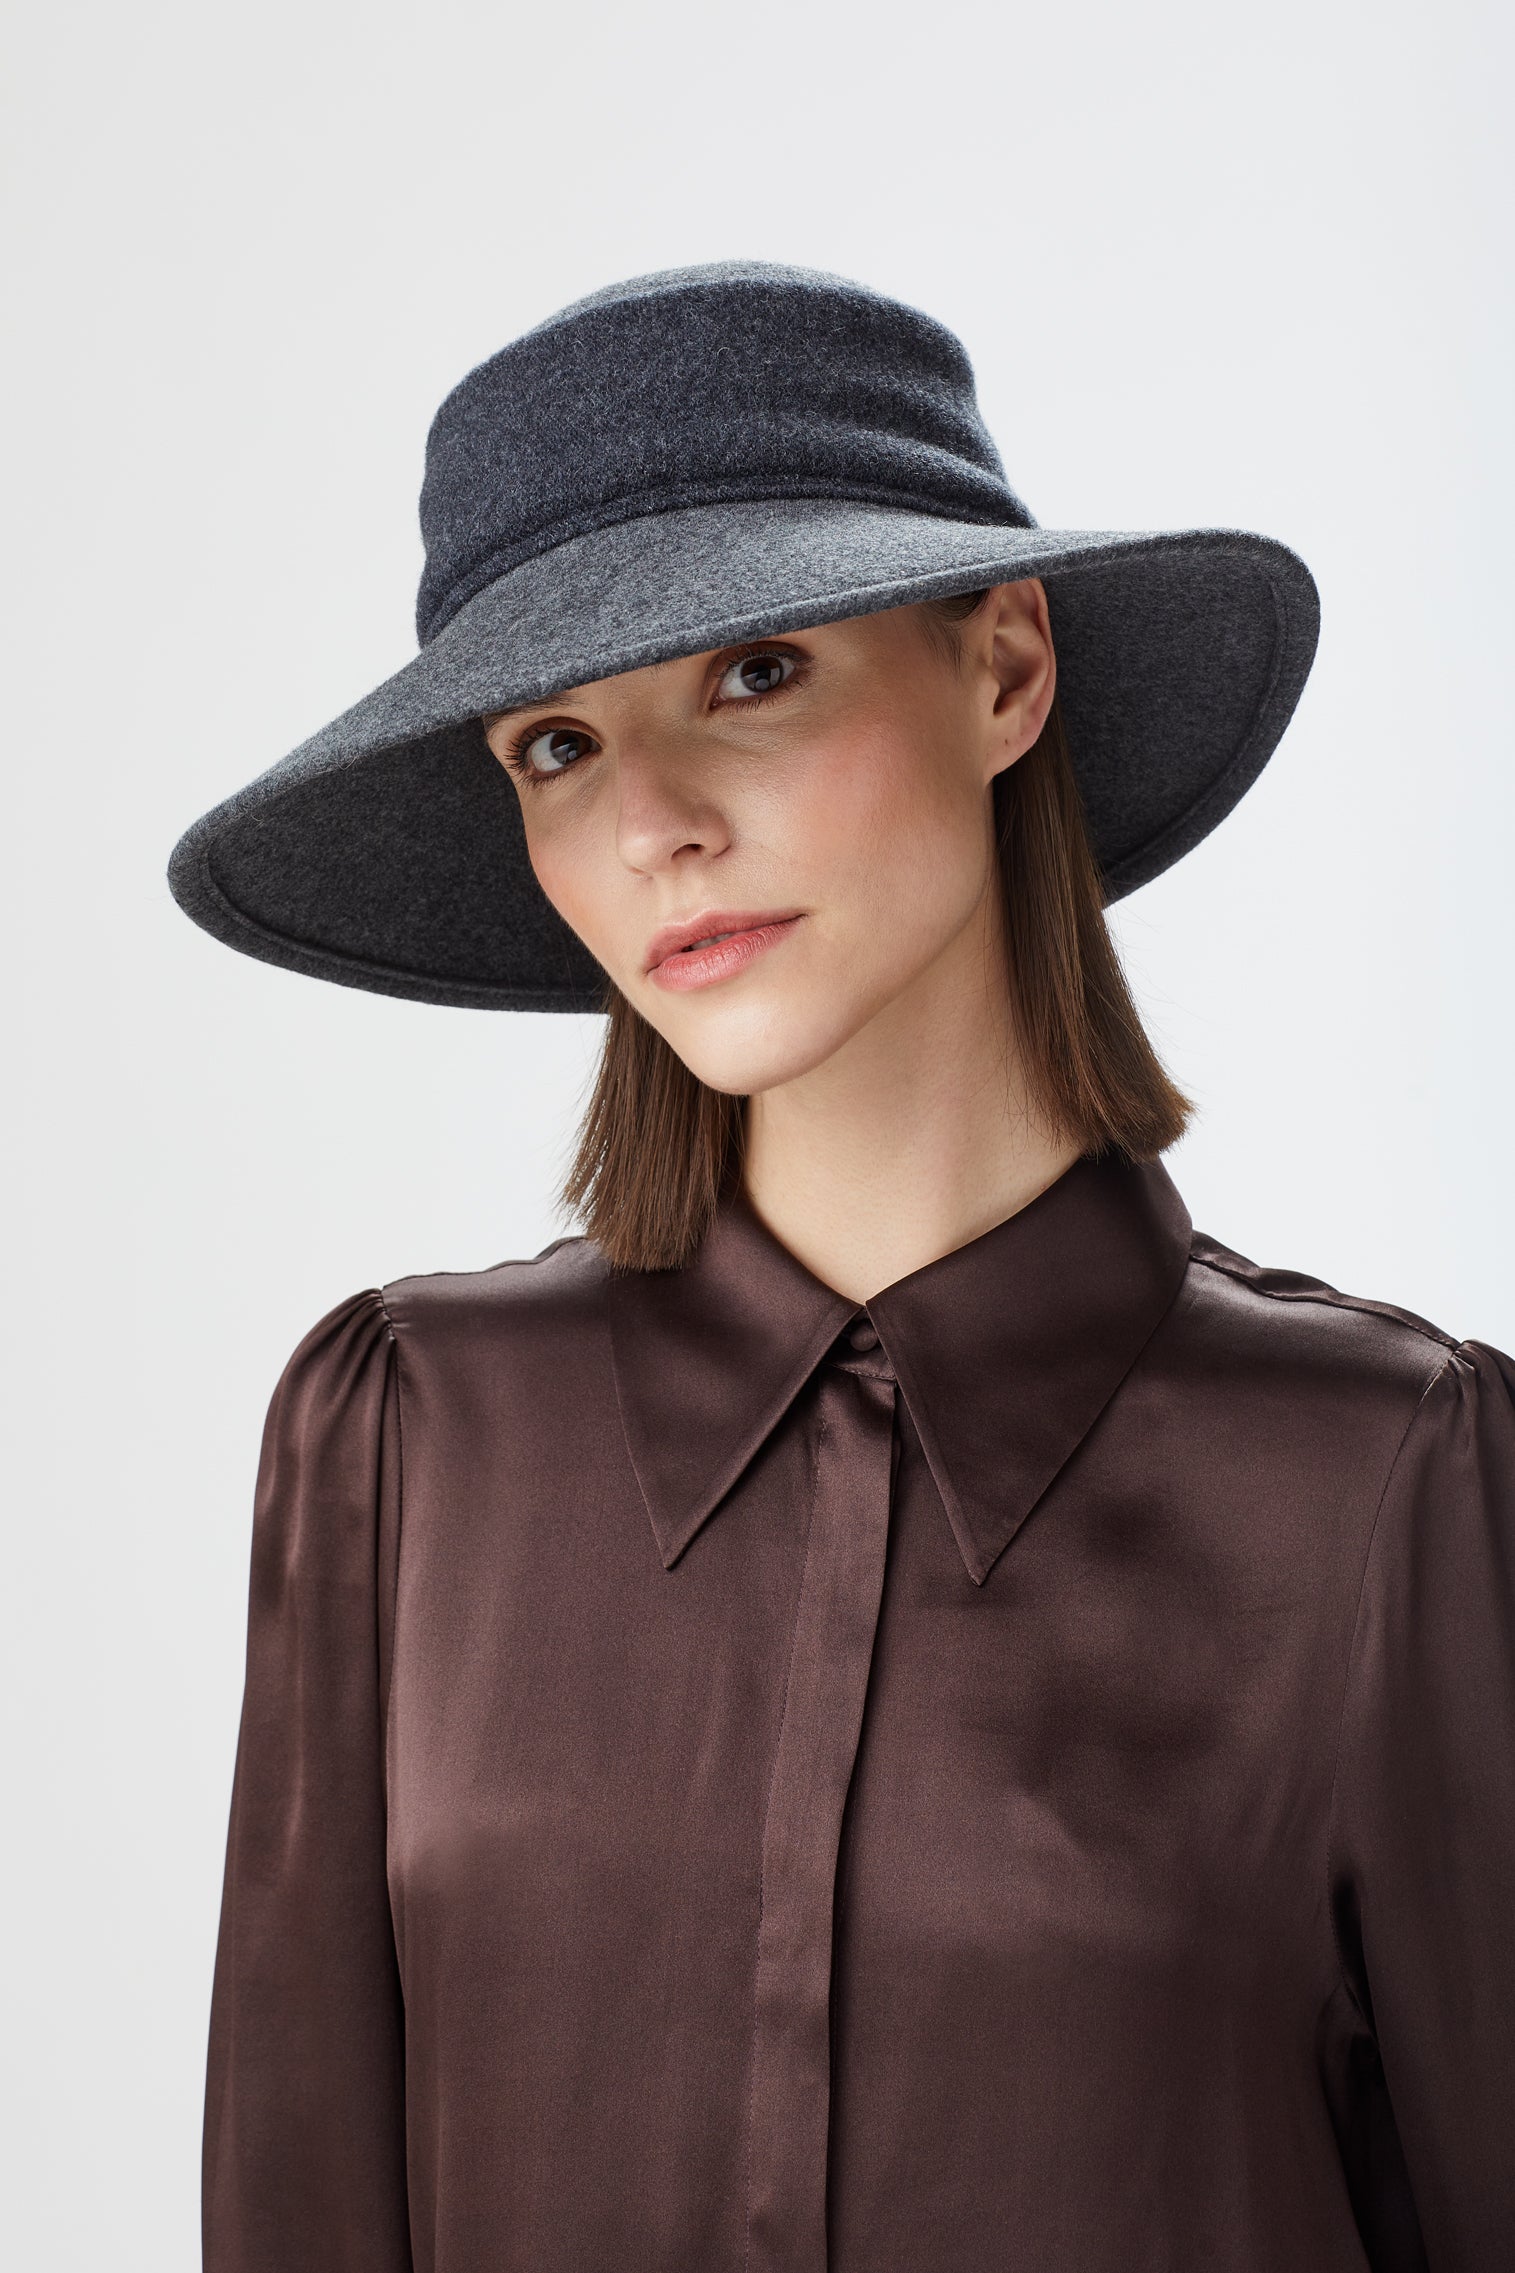 Gwen Packable Cloche - Packable Hats for Travel - Lock & Co. Hatters London UK